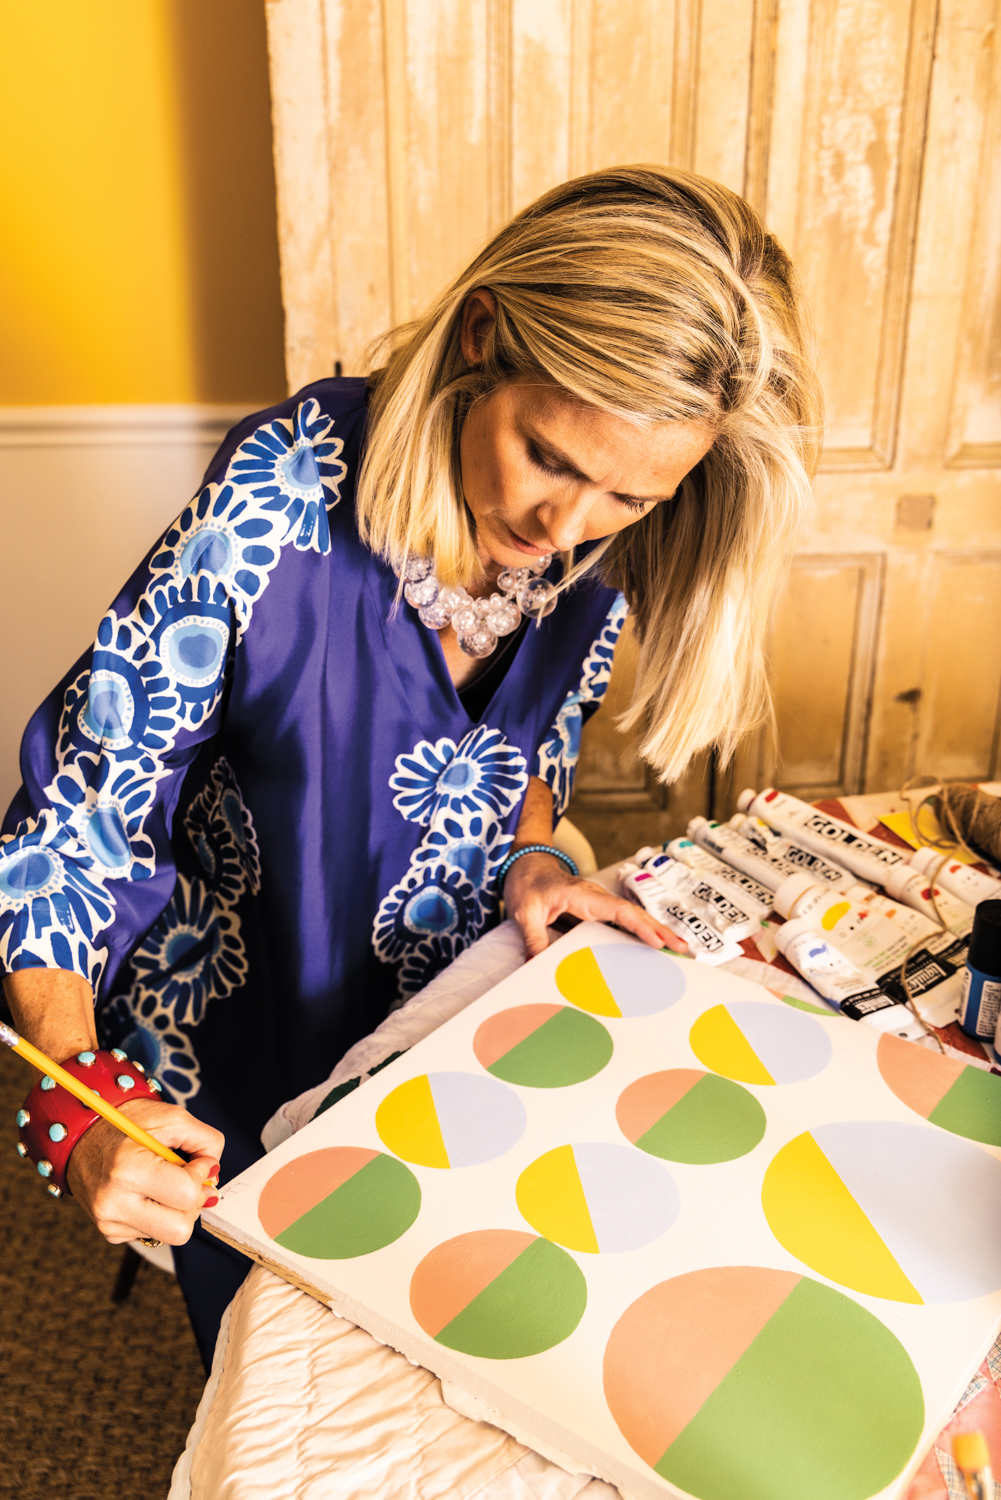 Artist Katie Powell Brickman signing one of her paintings featuring multicolored circles